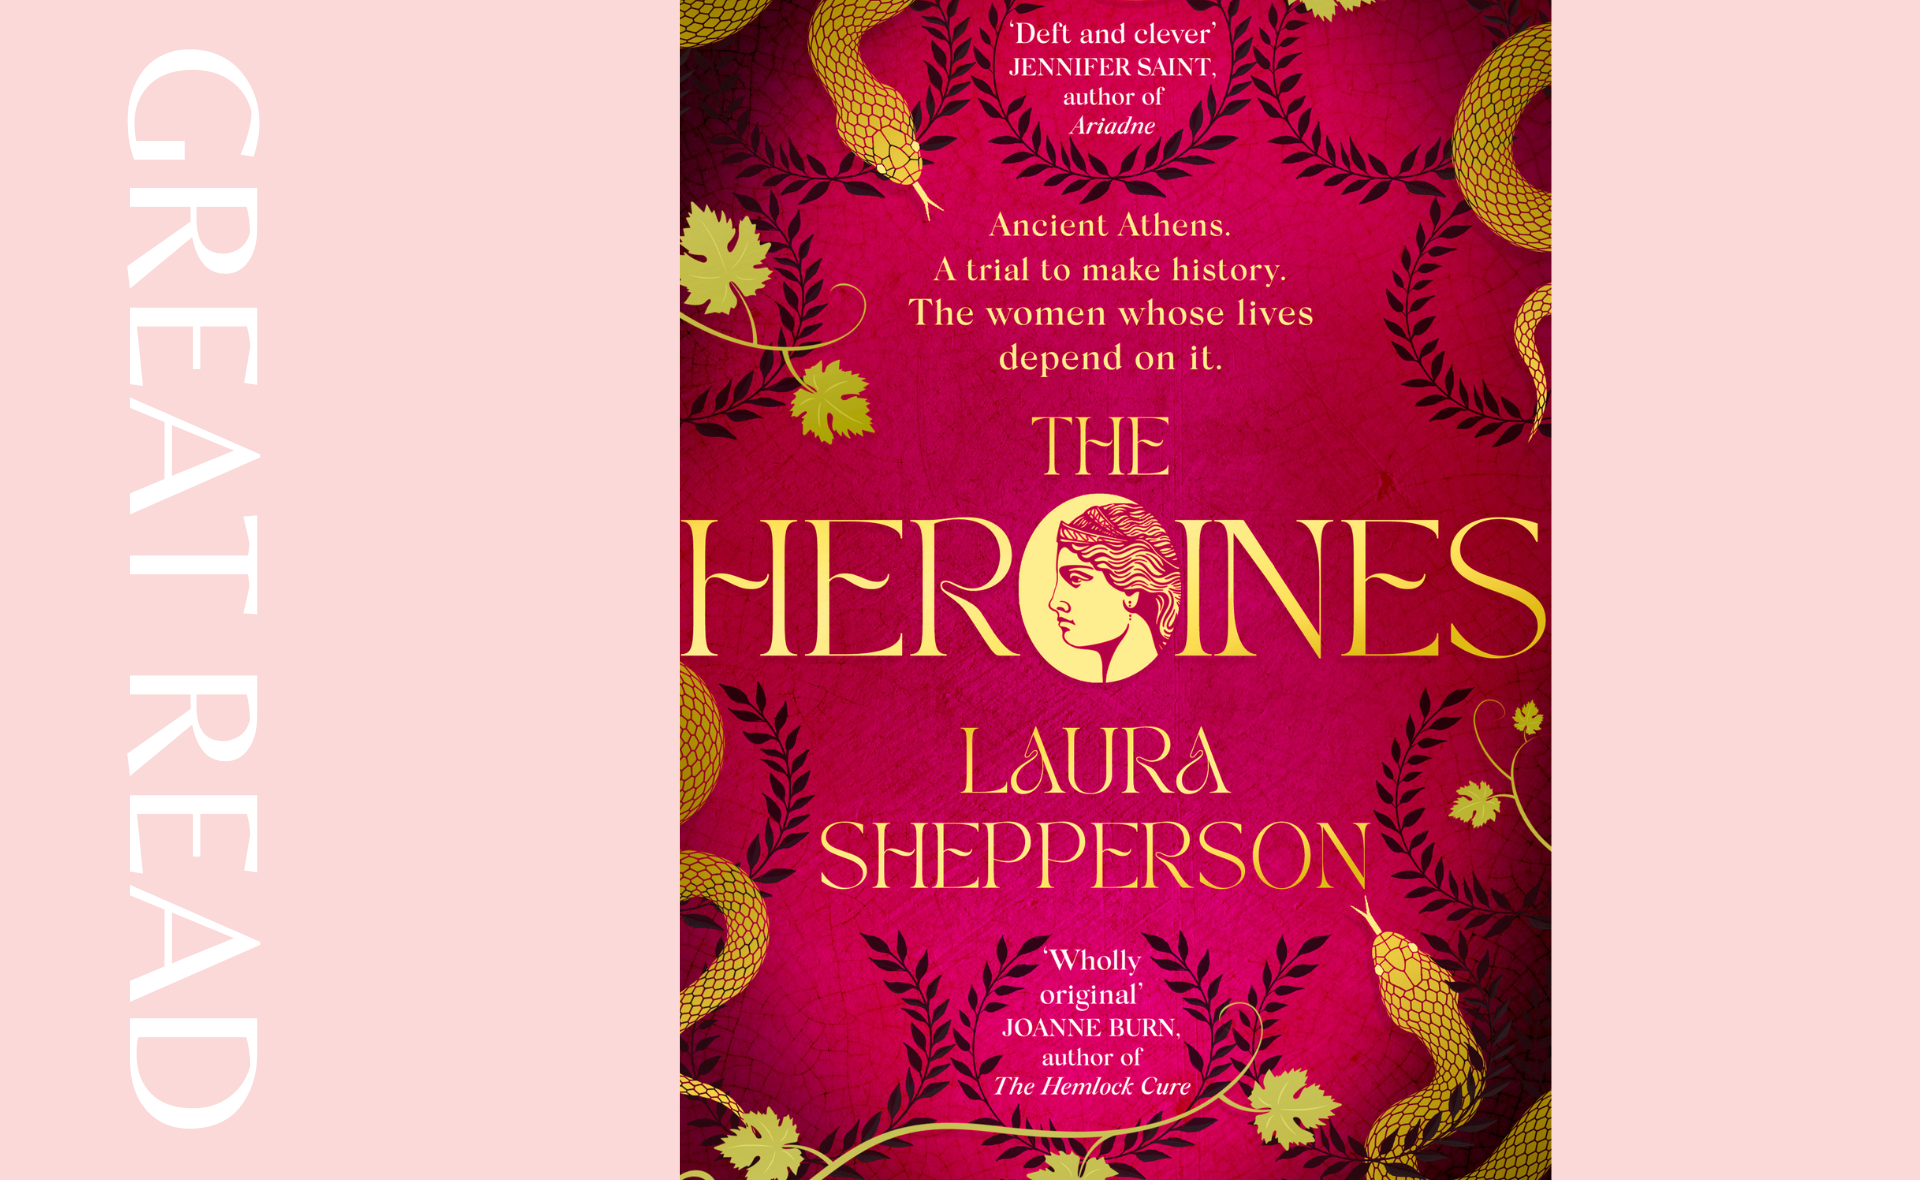 REVIEW: Laura Shepperson delivers an edgy, accessible feminist reworking of the tricky story of Phaedra in The Heroines